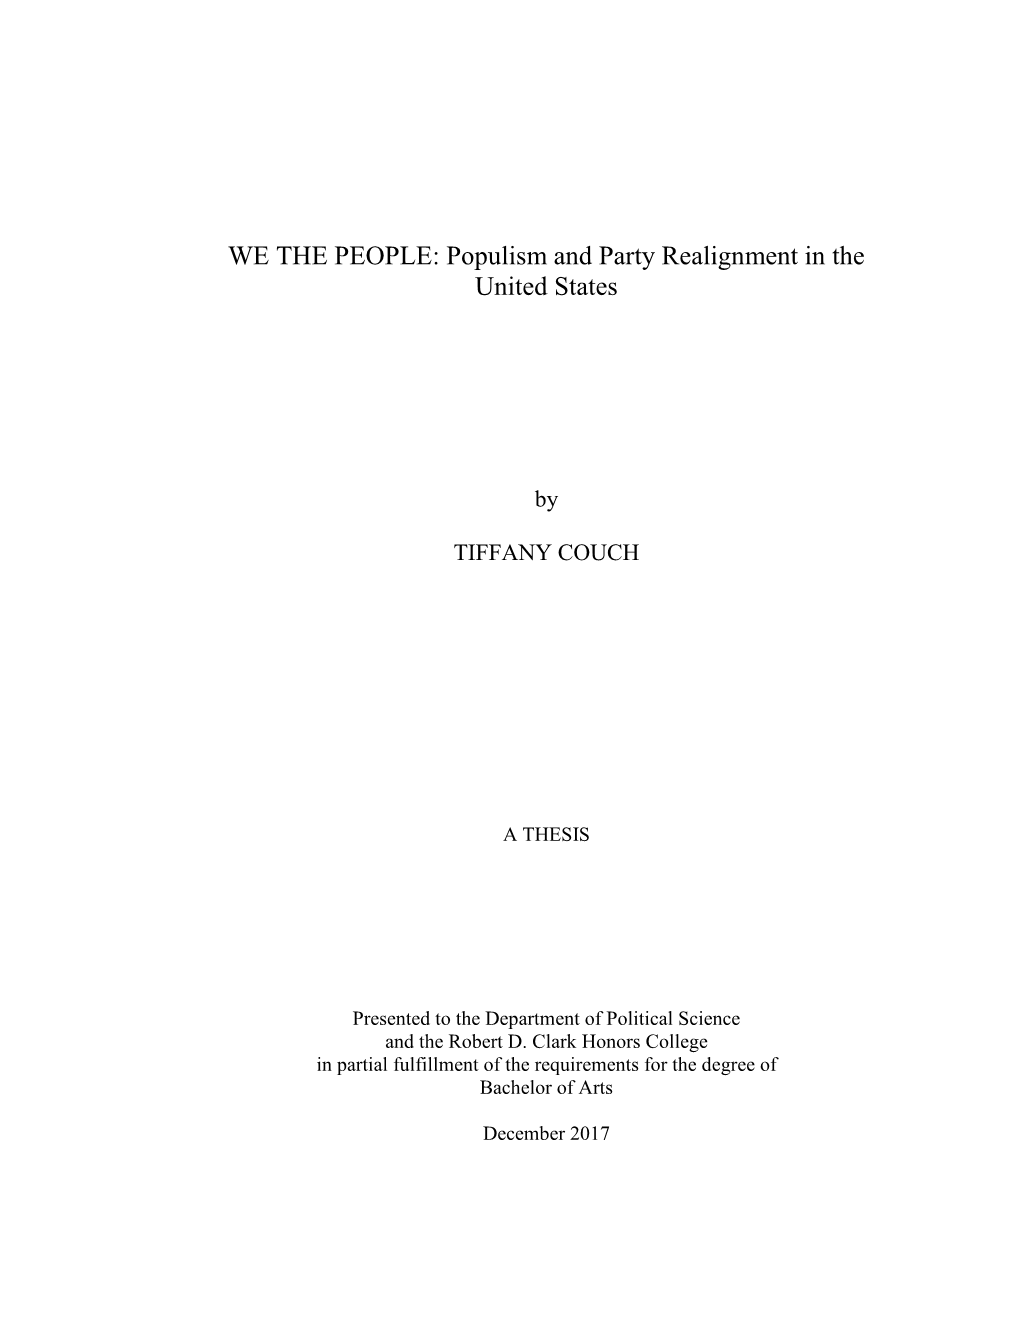 WE the PEOPLE: Populism and Party Realignment in the United States